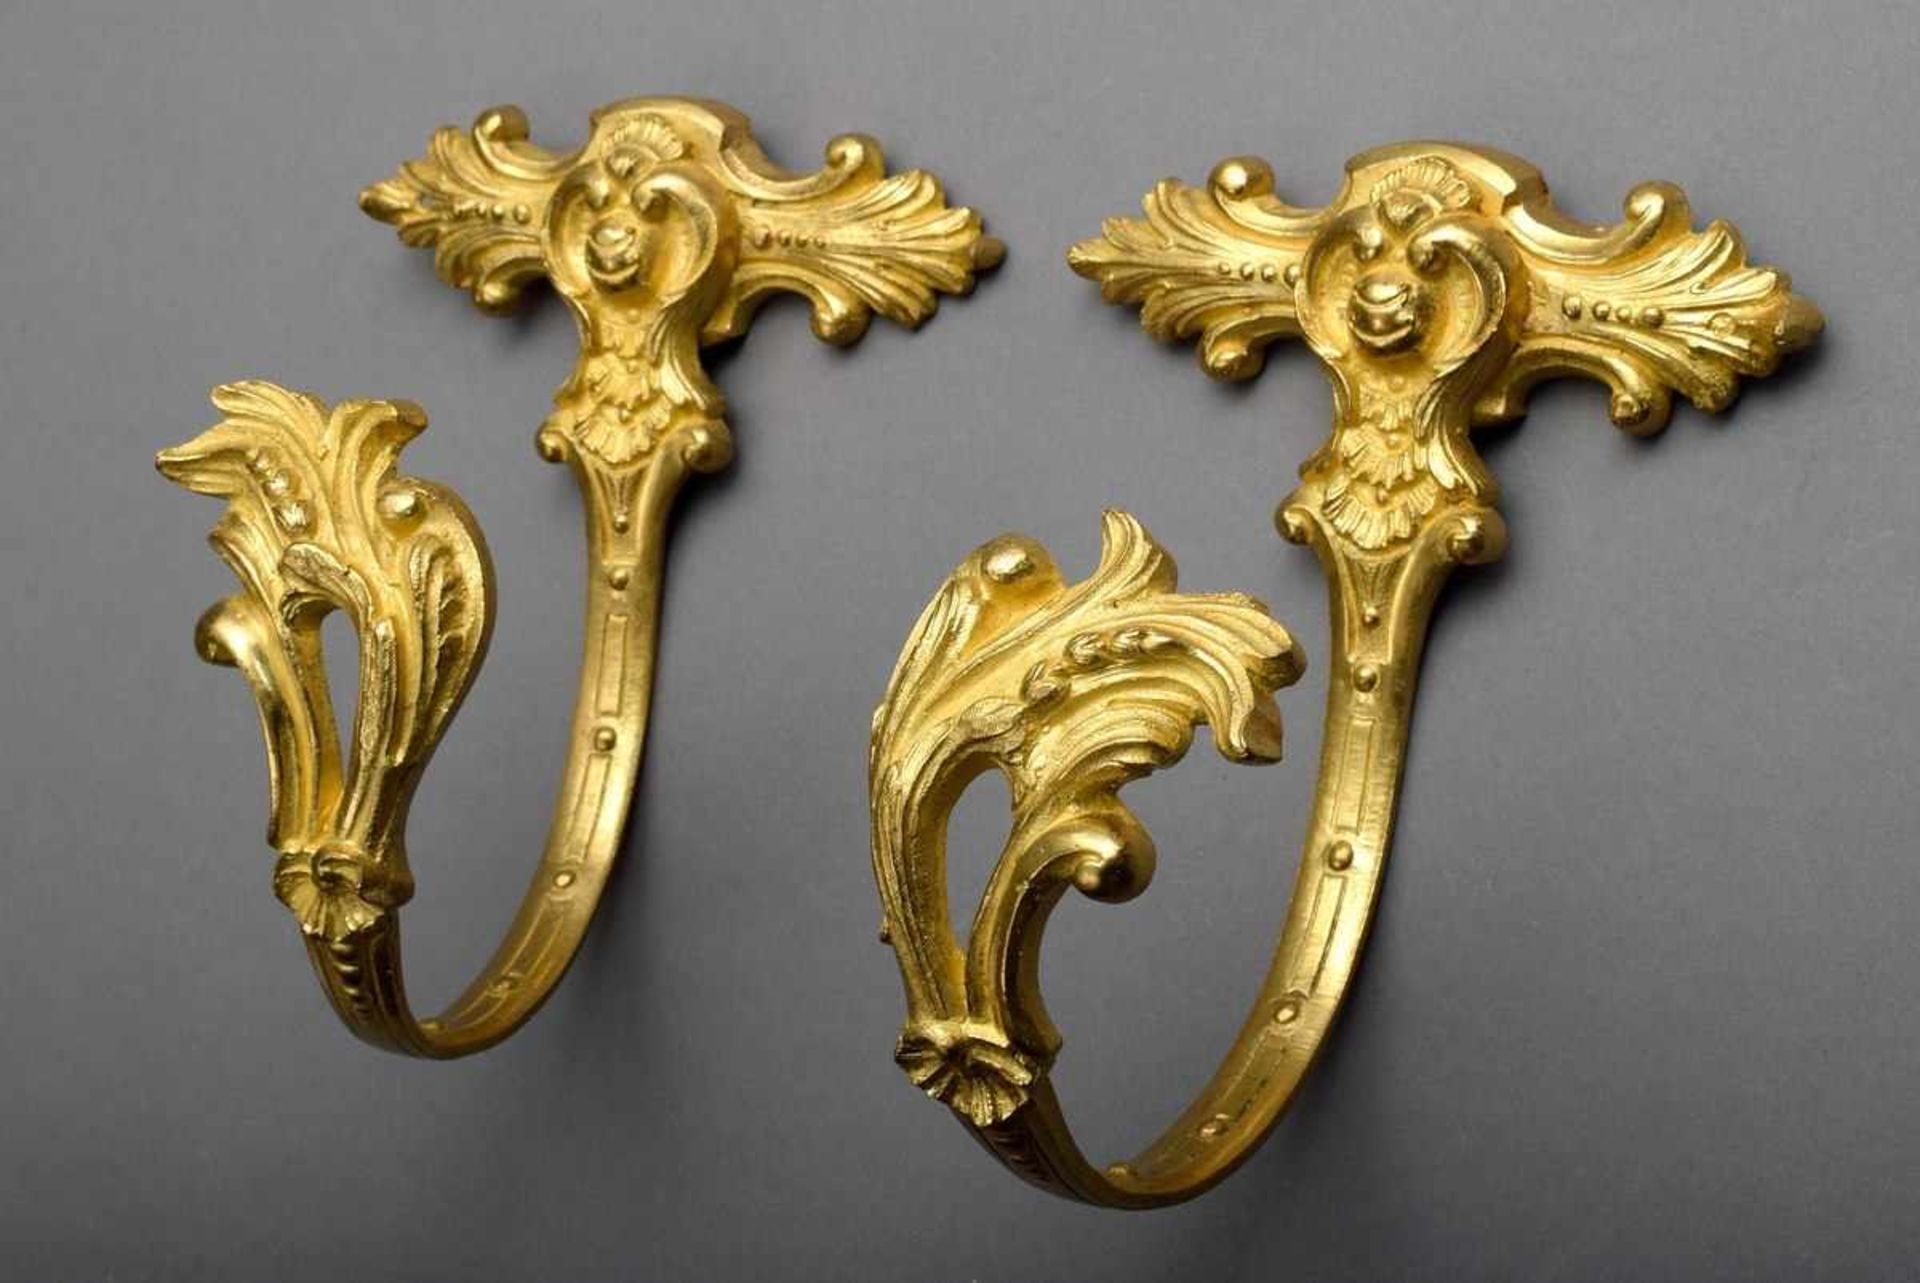 Pair of gilded bronze curtain holders with floral relief, backside inscribed EG 329, 19th century,